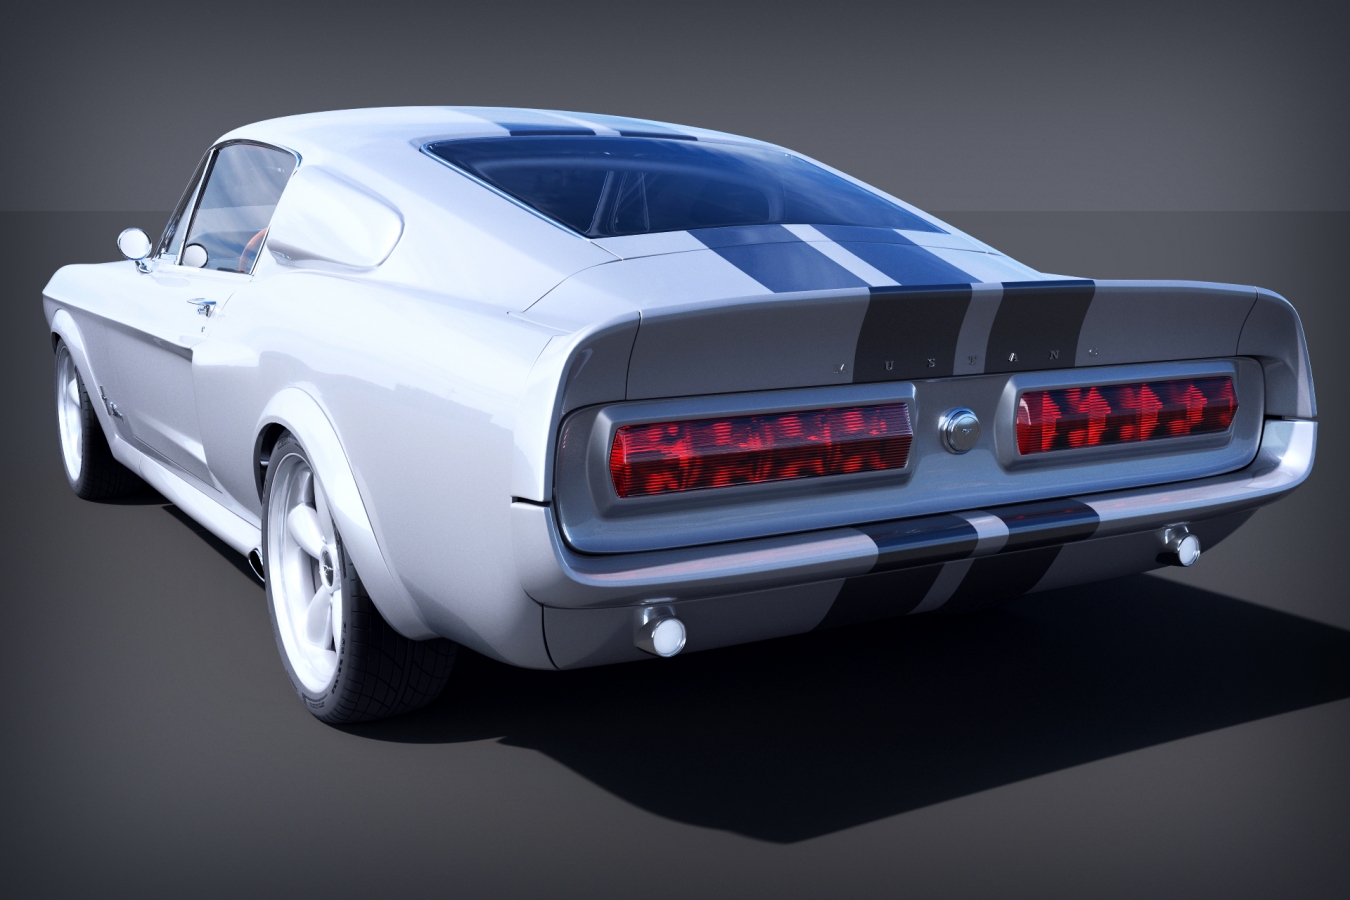 Ford-Mustang-Gt500-Eleanor-view01-View03.jpg